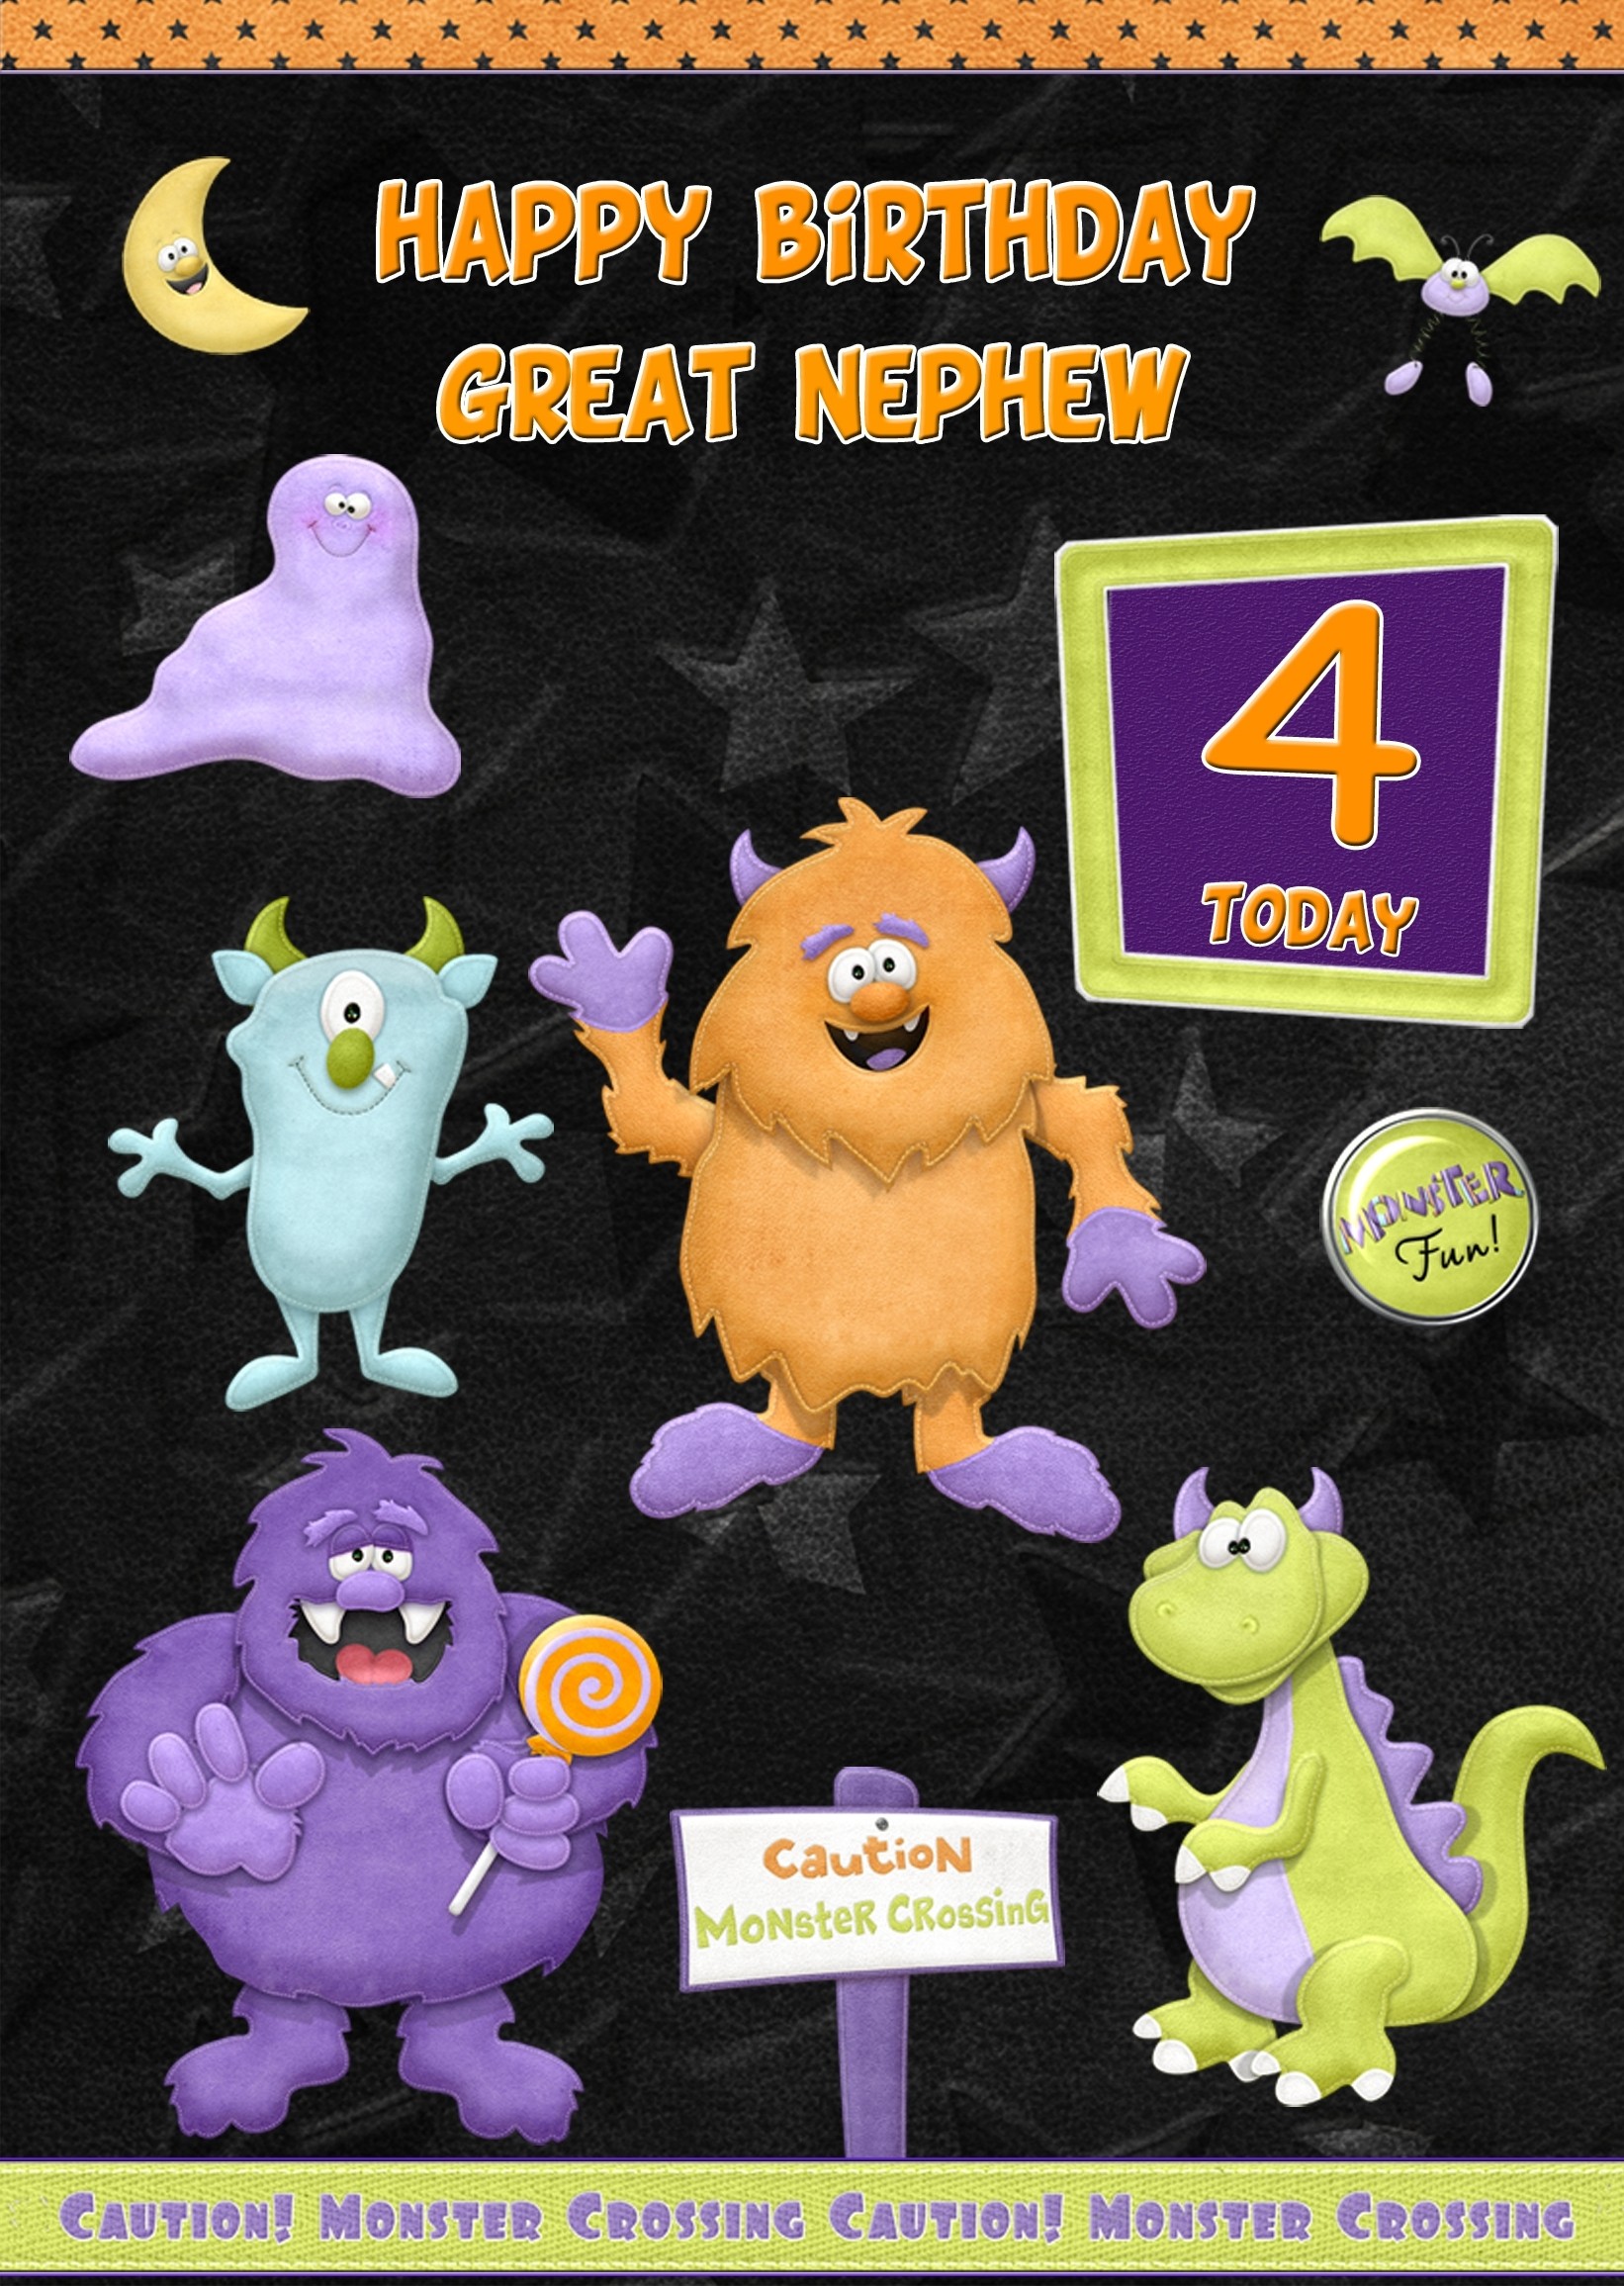 Kids 4th Birthday Funny Monster Cartoon Card for Great Nephew